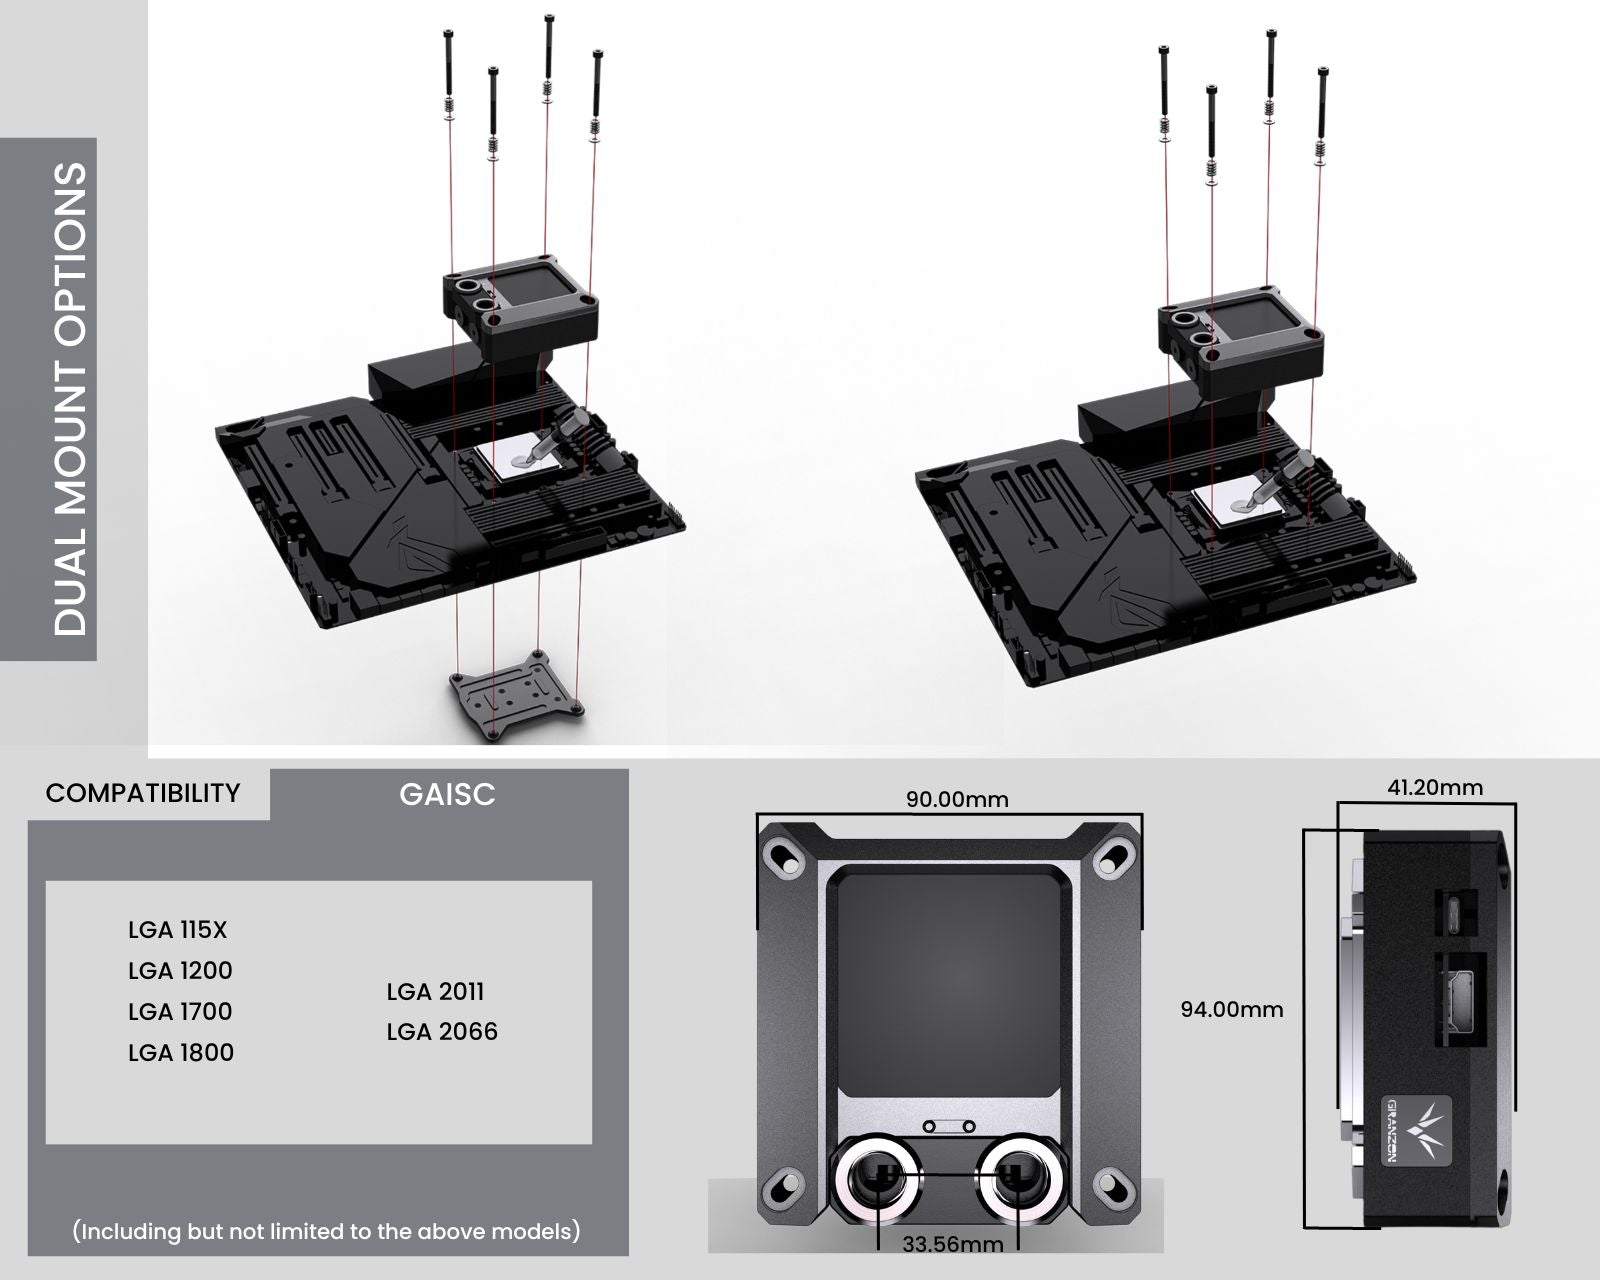 A large marketing image providing additional information about the product Bykski Granzon GAISC Digital Intel CPU Waterblock - Additional alt info not provided